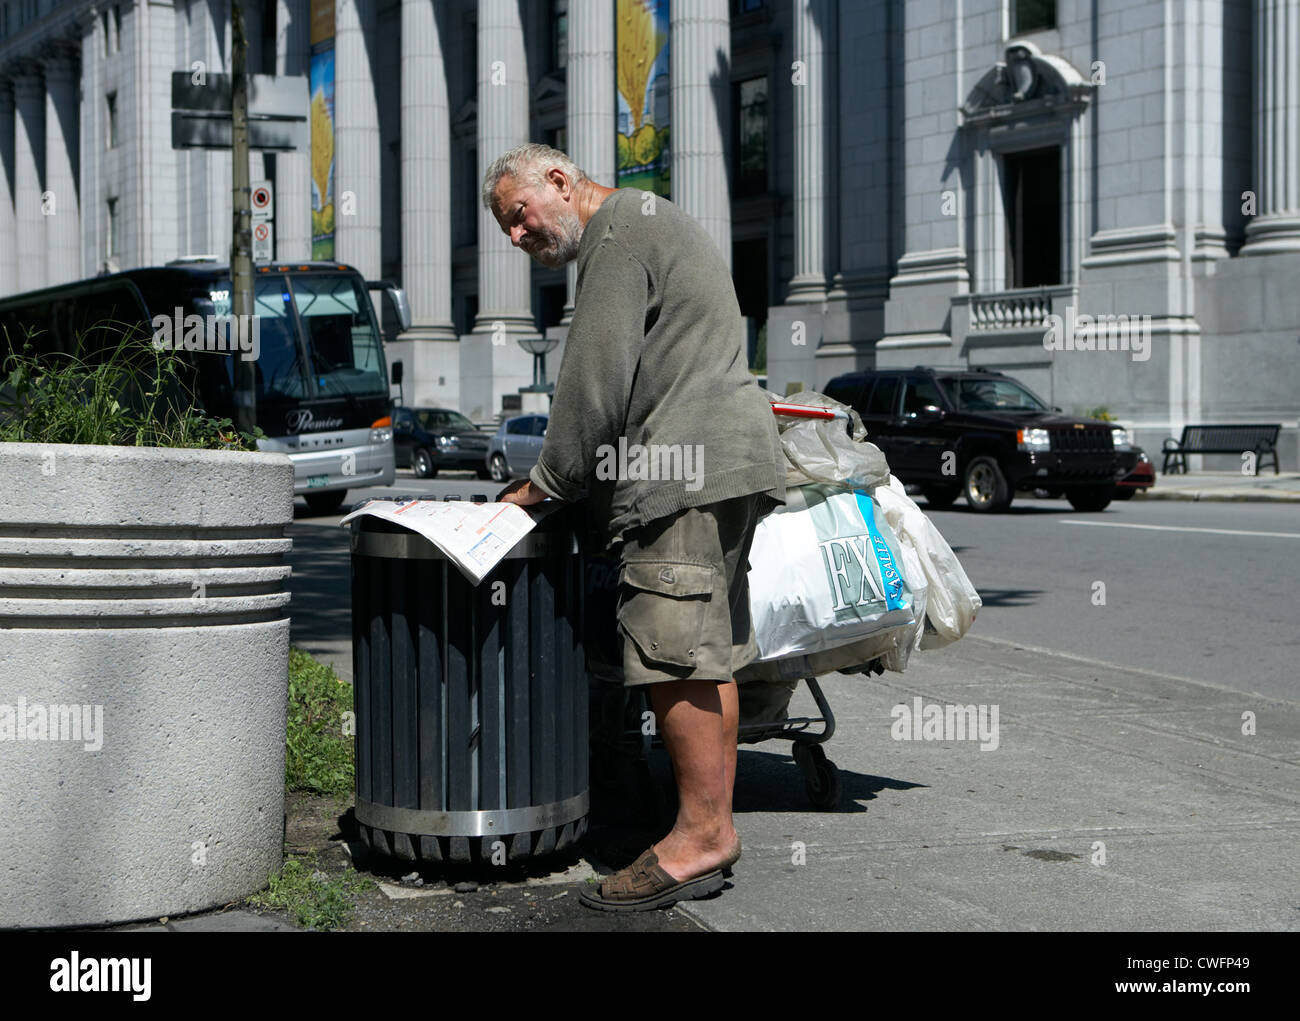 Montreal - A homeless man reads a newspaper in a trash Stock Photo